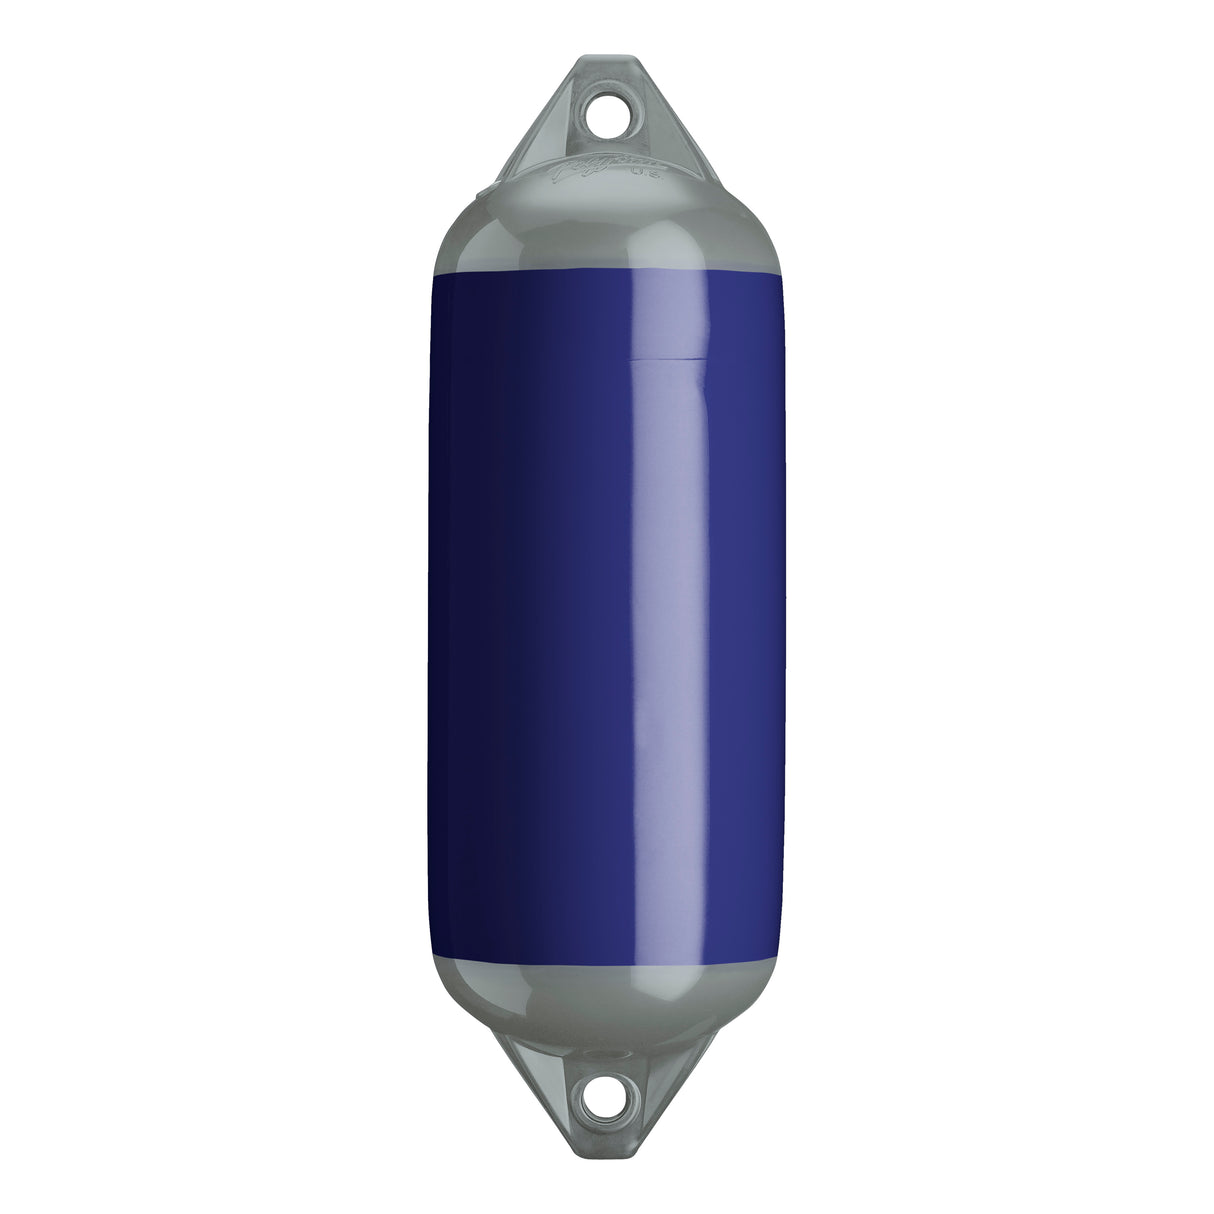 Navy Blue boat fender with Grey-Top, Polyform F-2